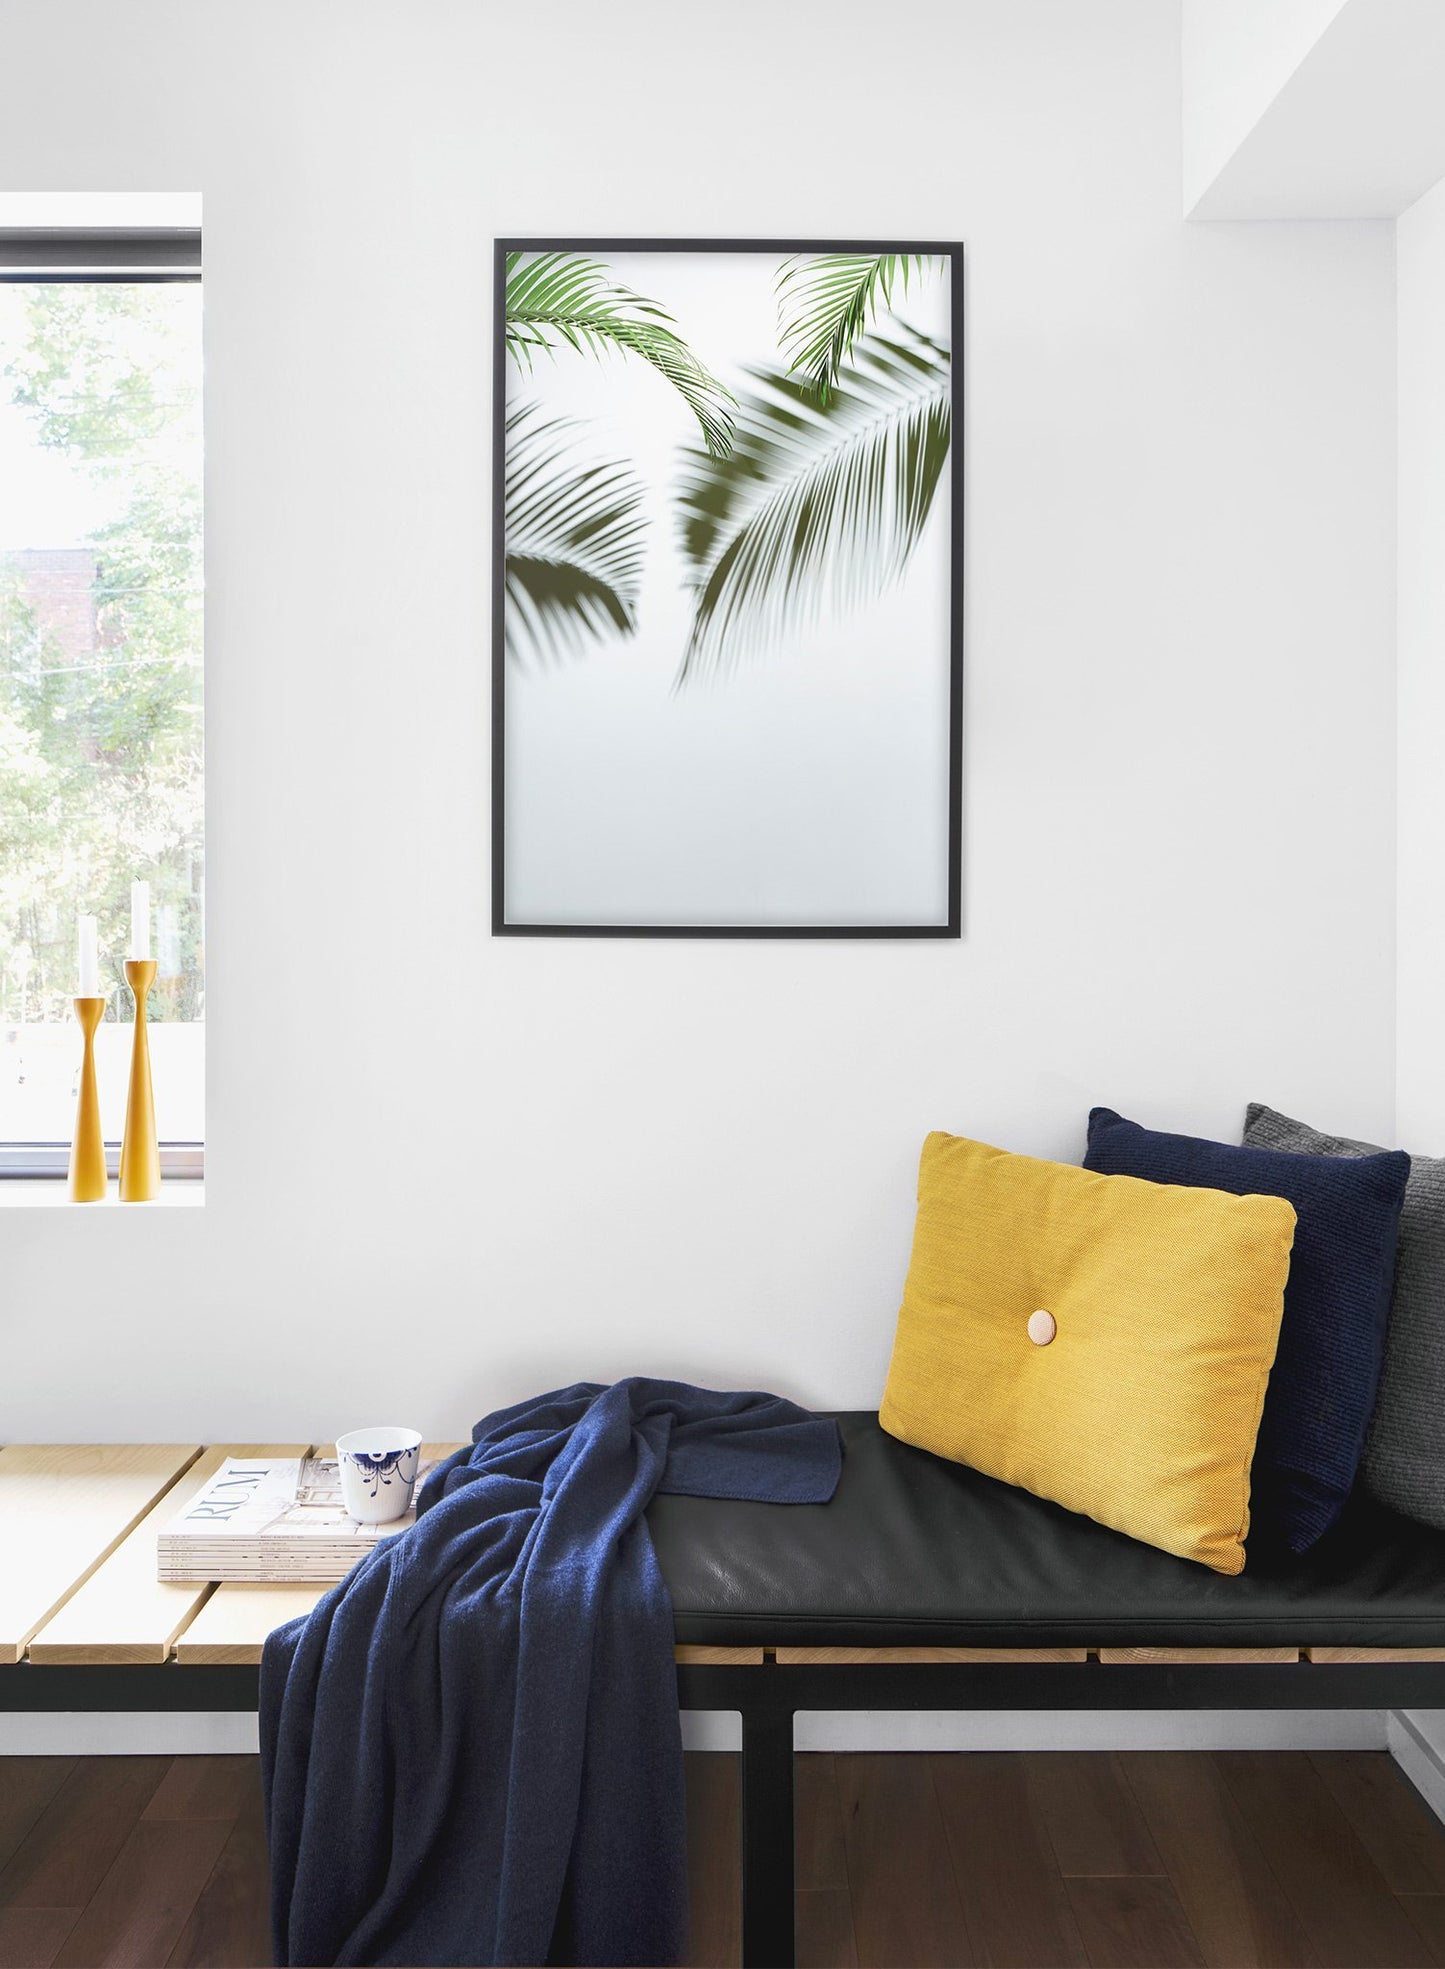 Tropic Blur modern minimalist botanical photography poster by Opposite Wall - Bedroom